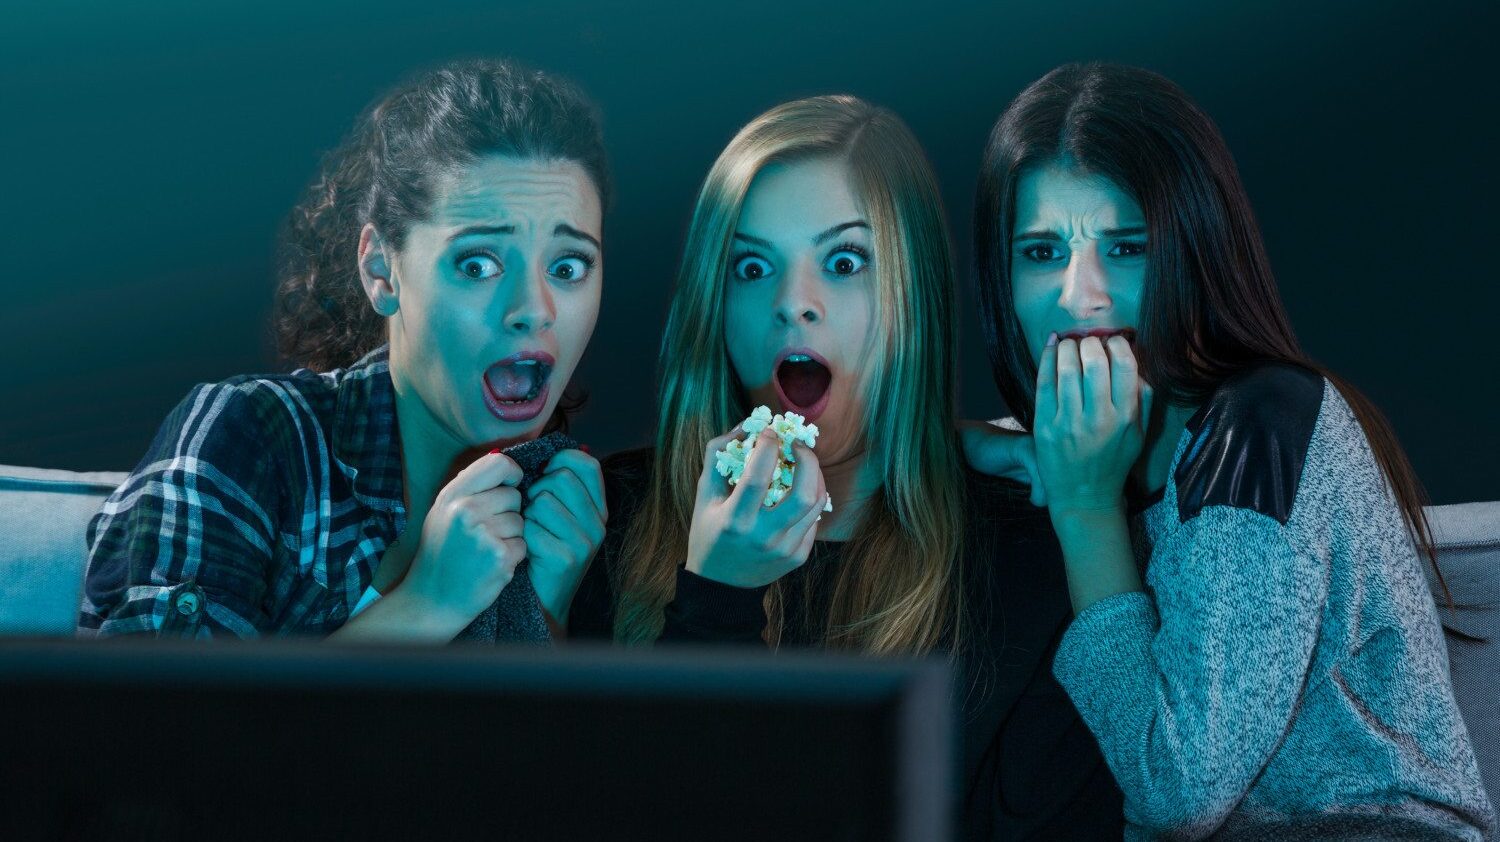 Scared teens watch horror on TV